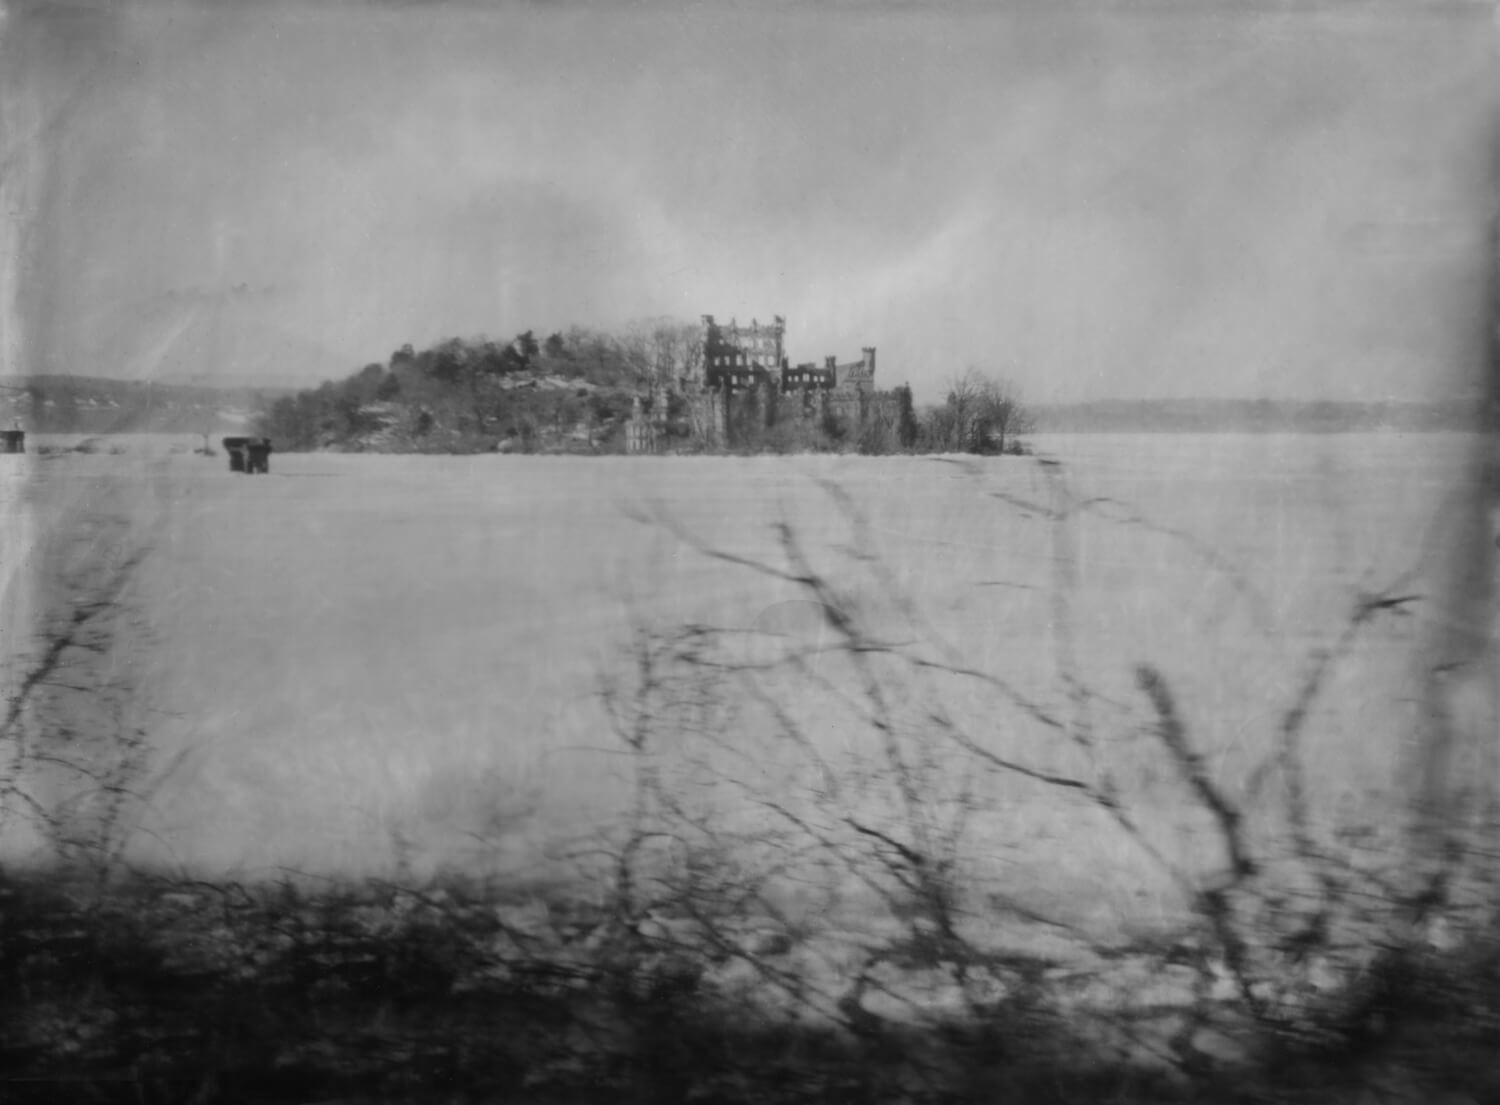 Wet Plate Collodion image of an island - By Jill Enfield